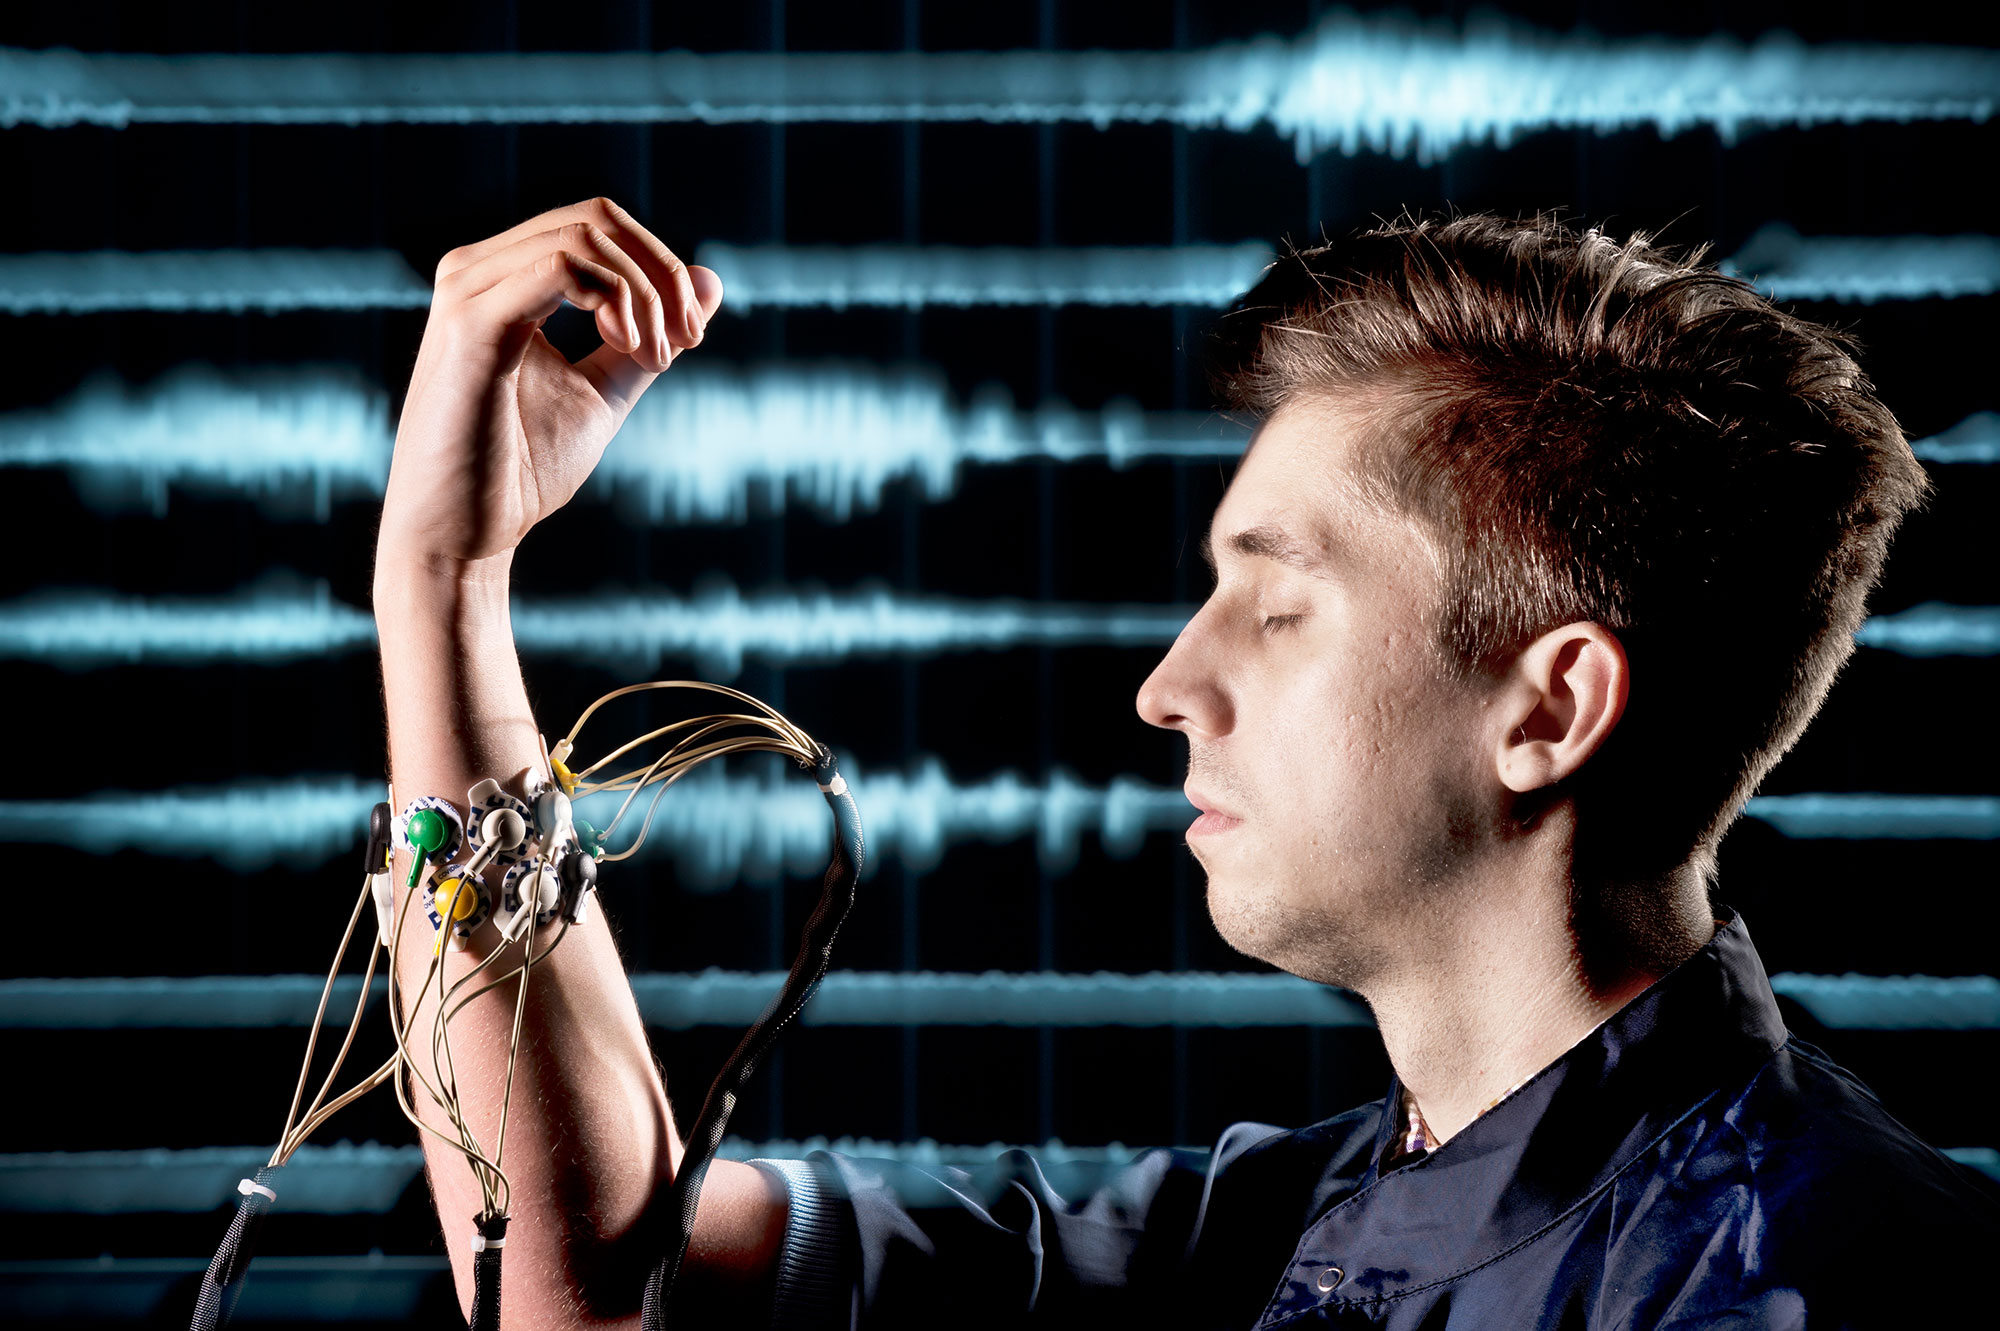 As Dmitry Amelin concentrates on the movement of his hand, electrodes measure the muscle impulses that could serve to control a prosthetic hand. 